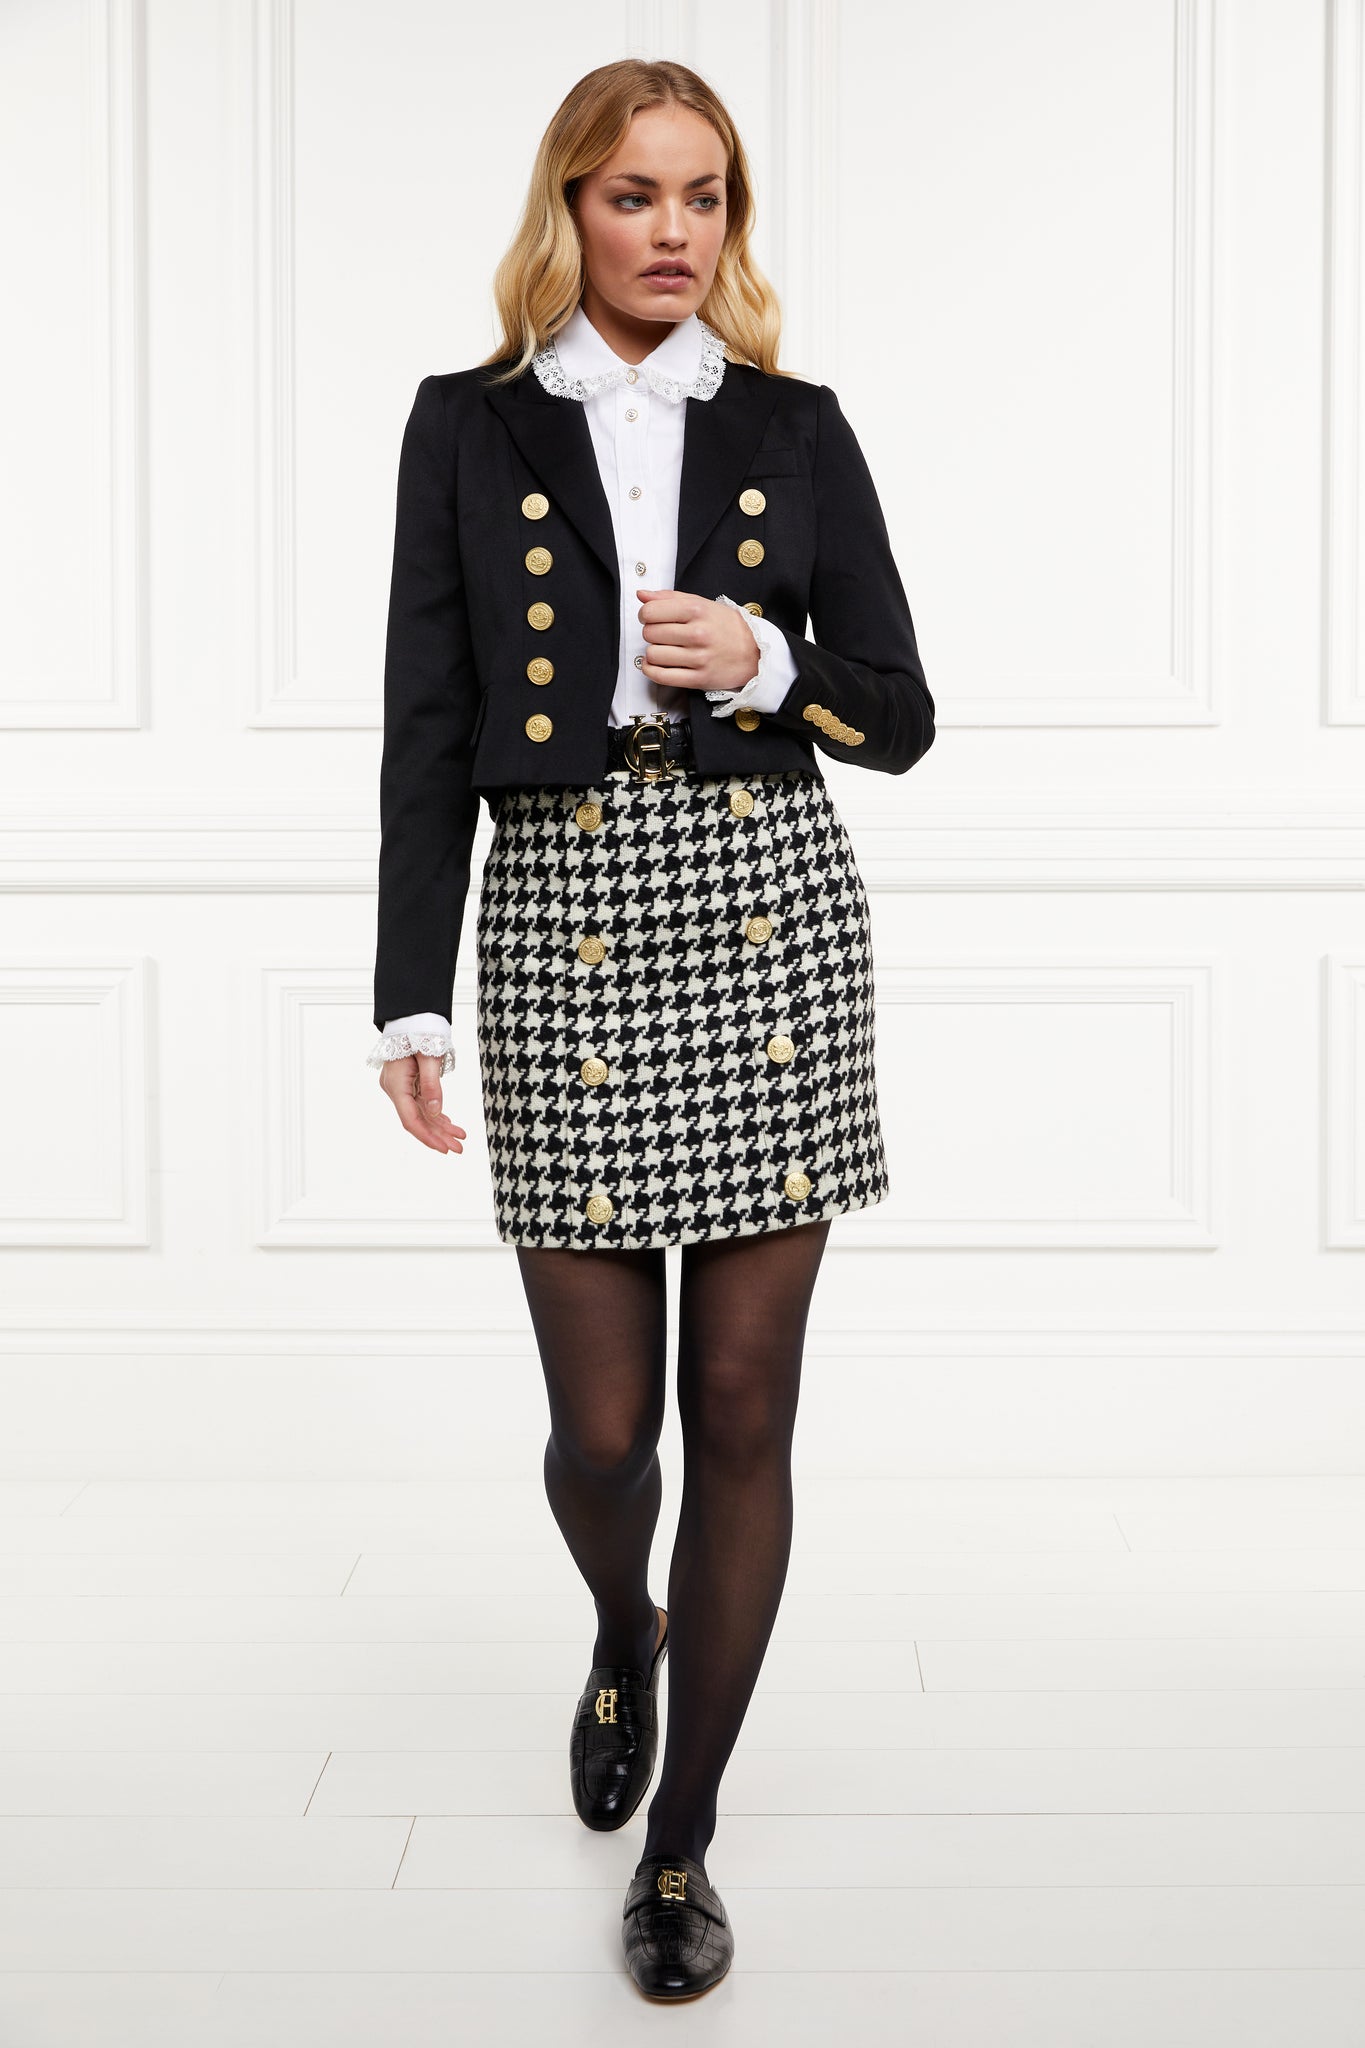 Black croc embossed leather backless loafers with a slightly pointed toe and gold hardware to the top, paired with a black and white houndstooth skirt, black tights, black croc embossed belt, white shirts with frilly collar and black cropped blazer